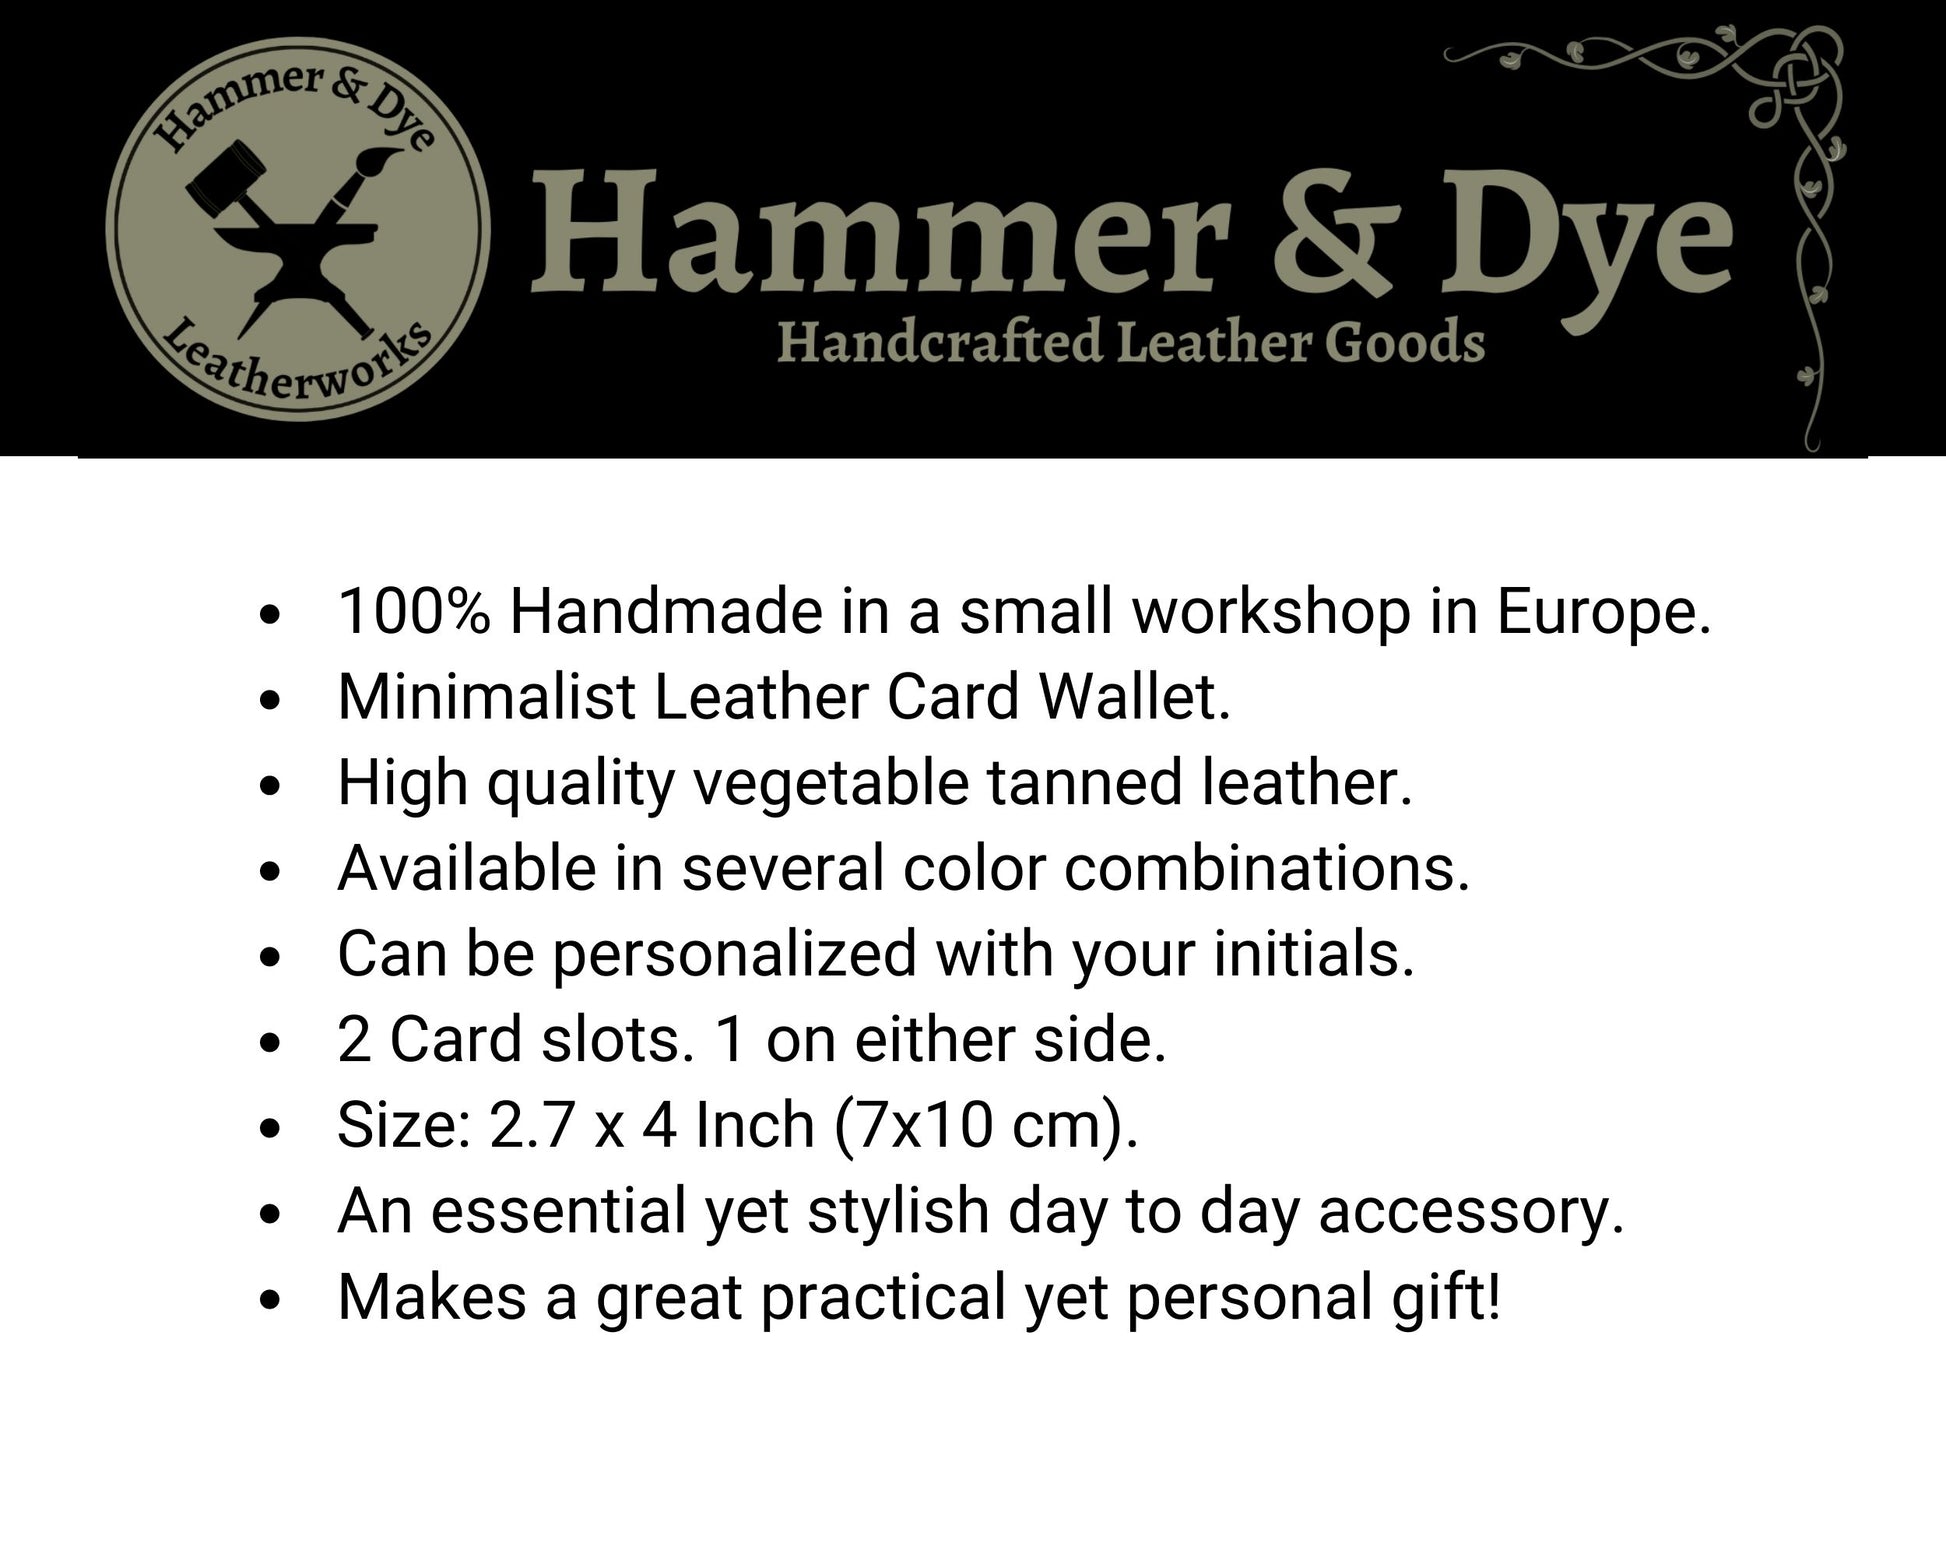 infographic with details about the handmade leather card holder